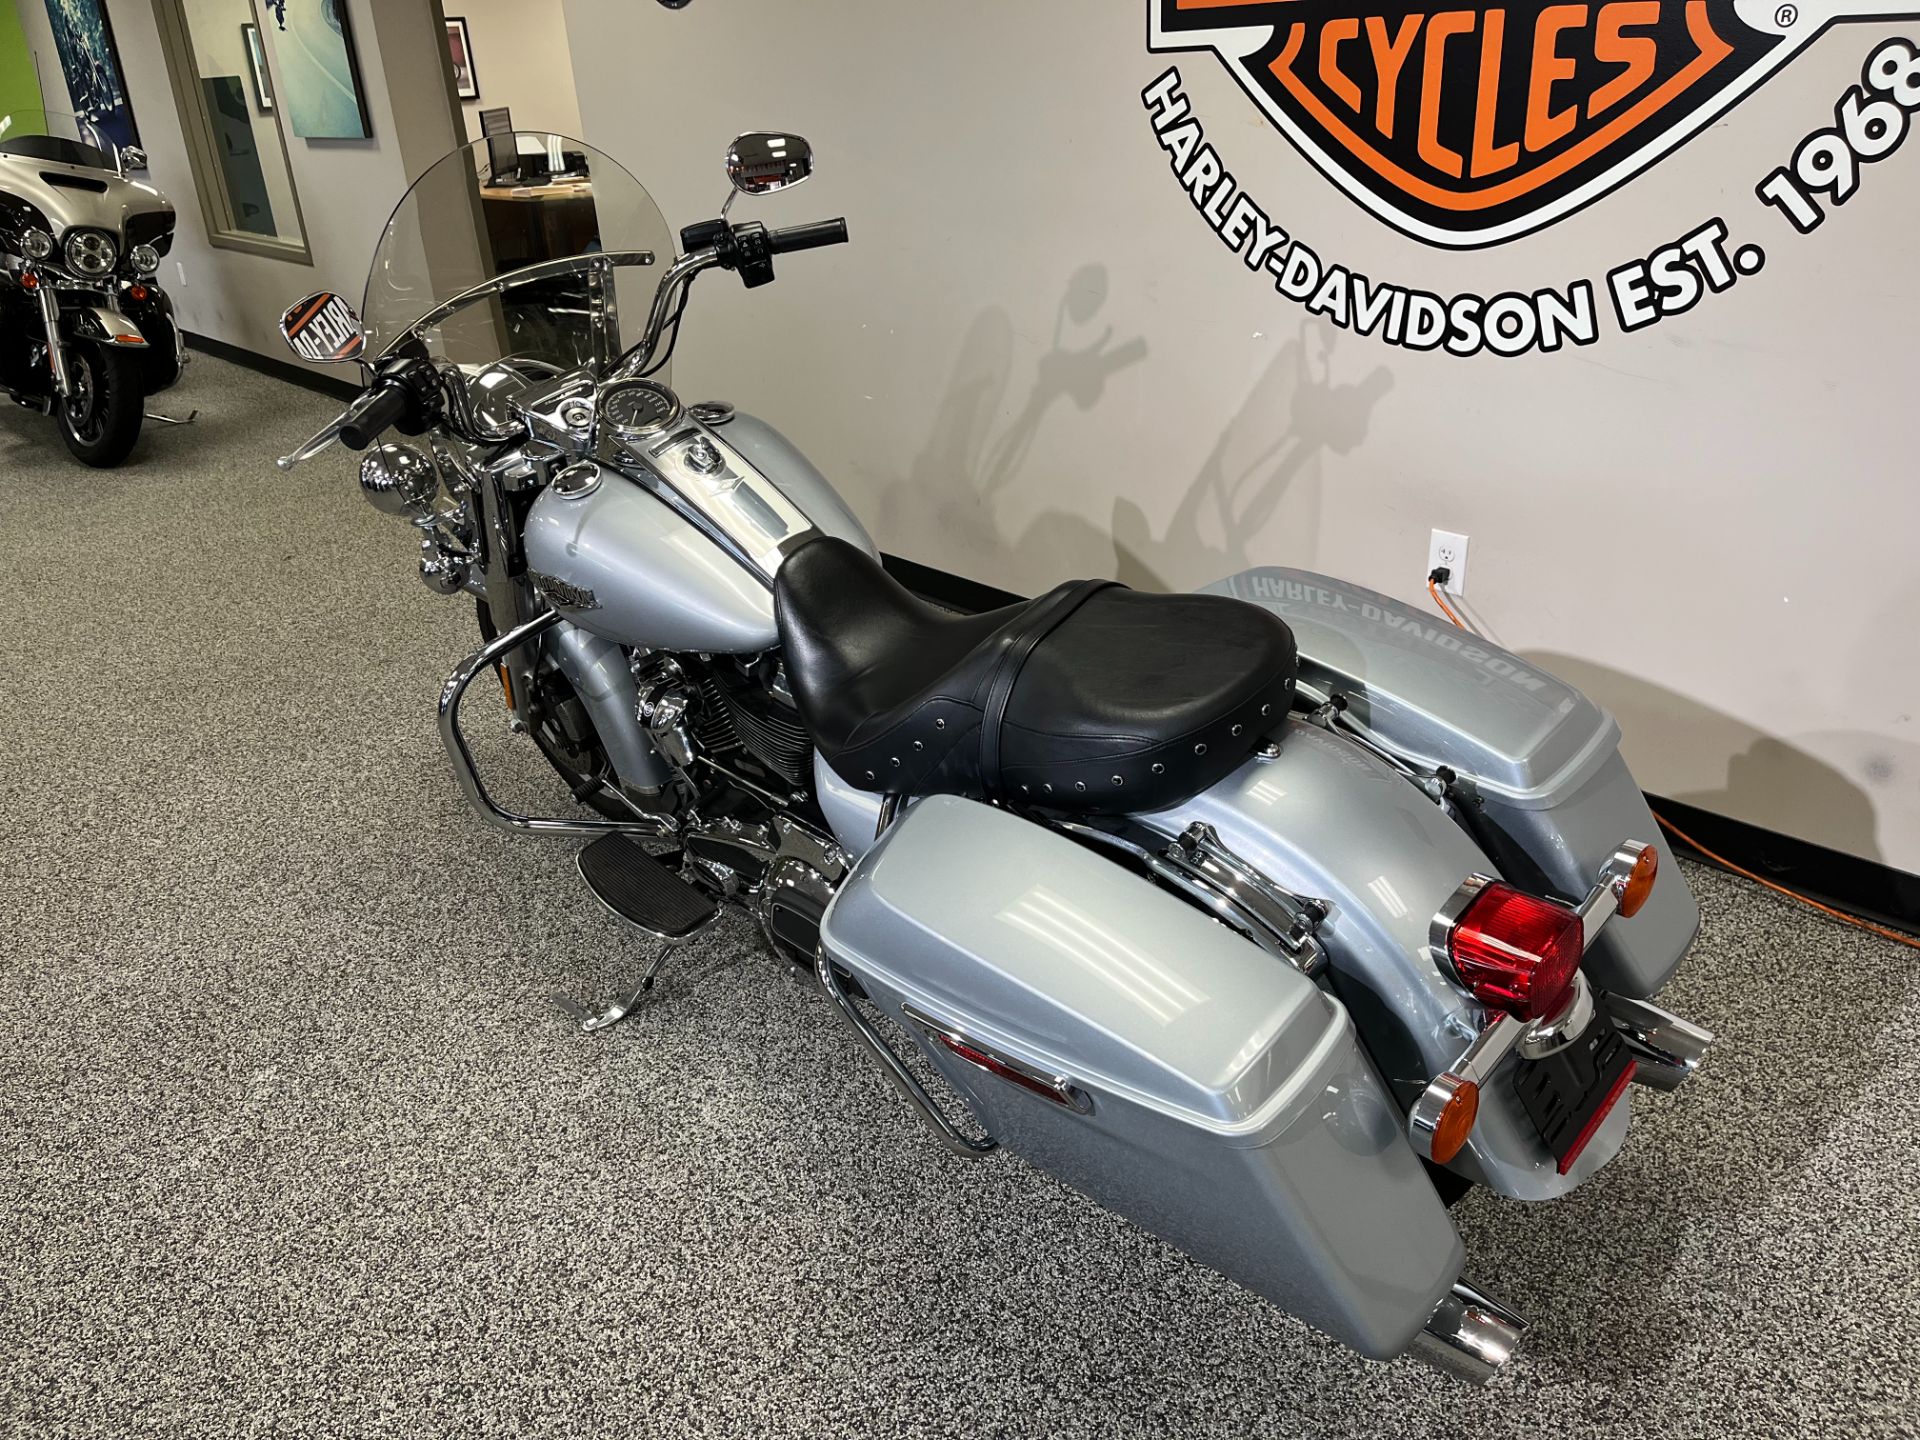 2019 Harley-Davidson Road King® in Knoxville, Tennessee - Photo 9